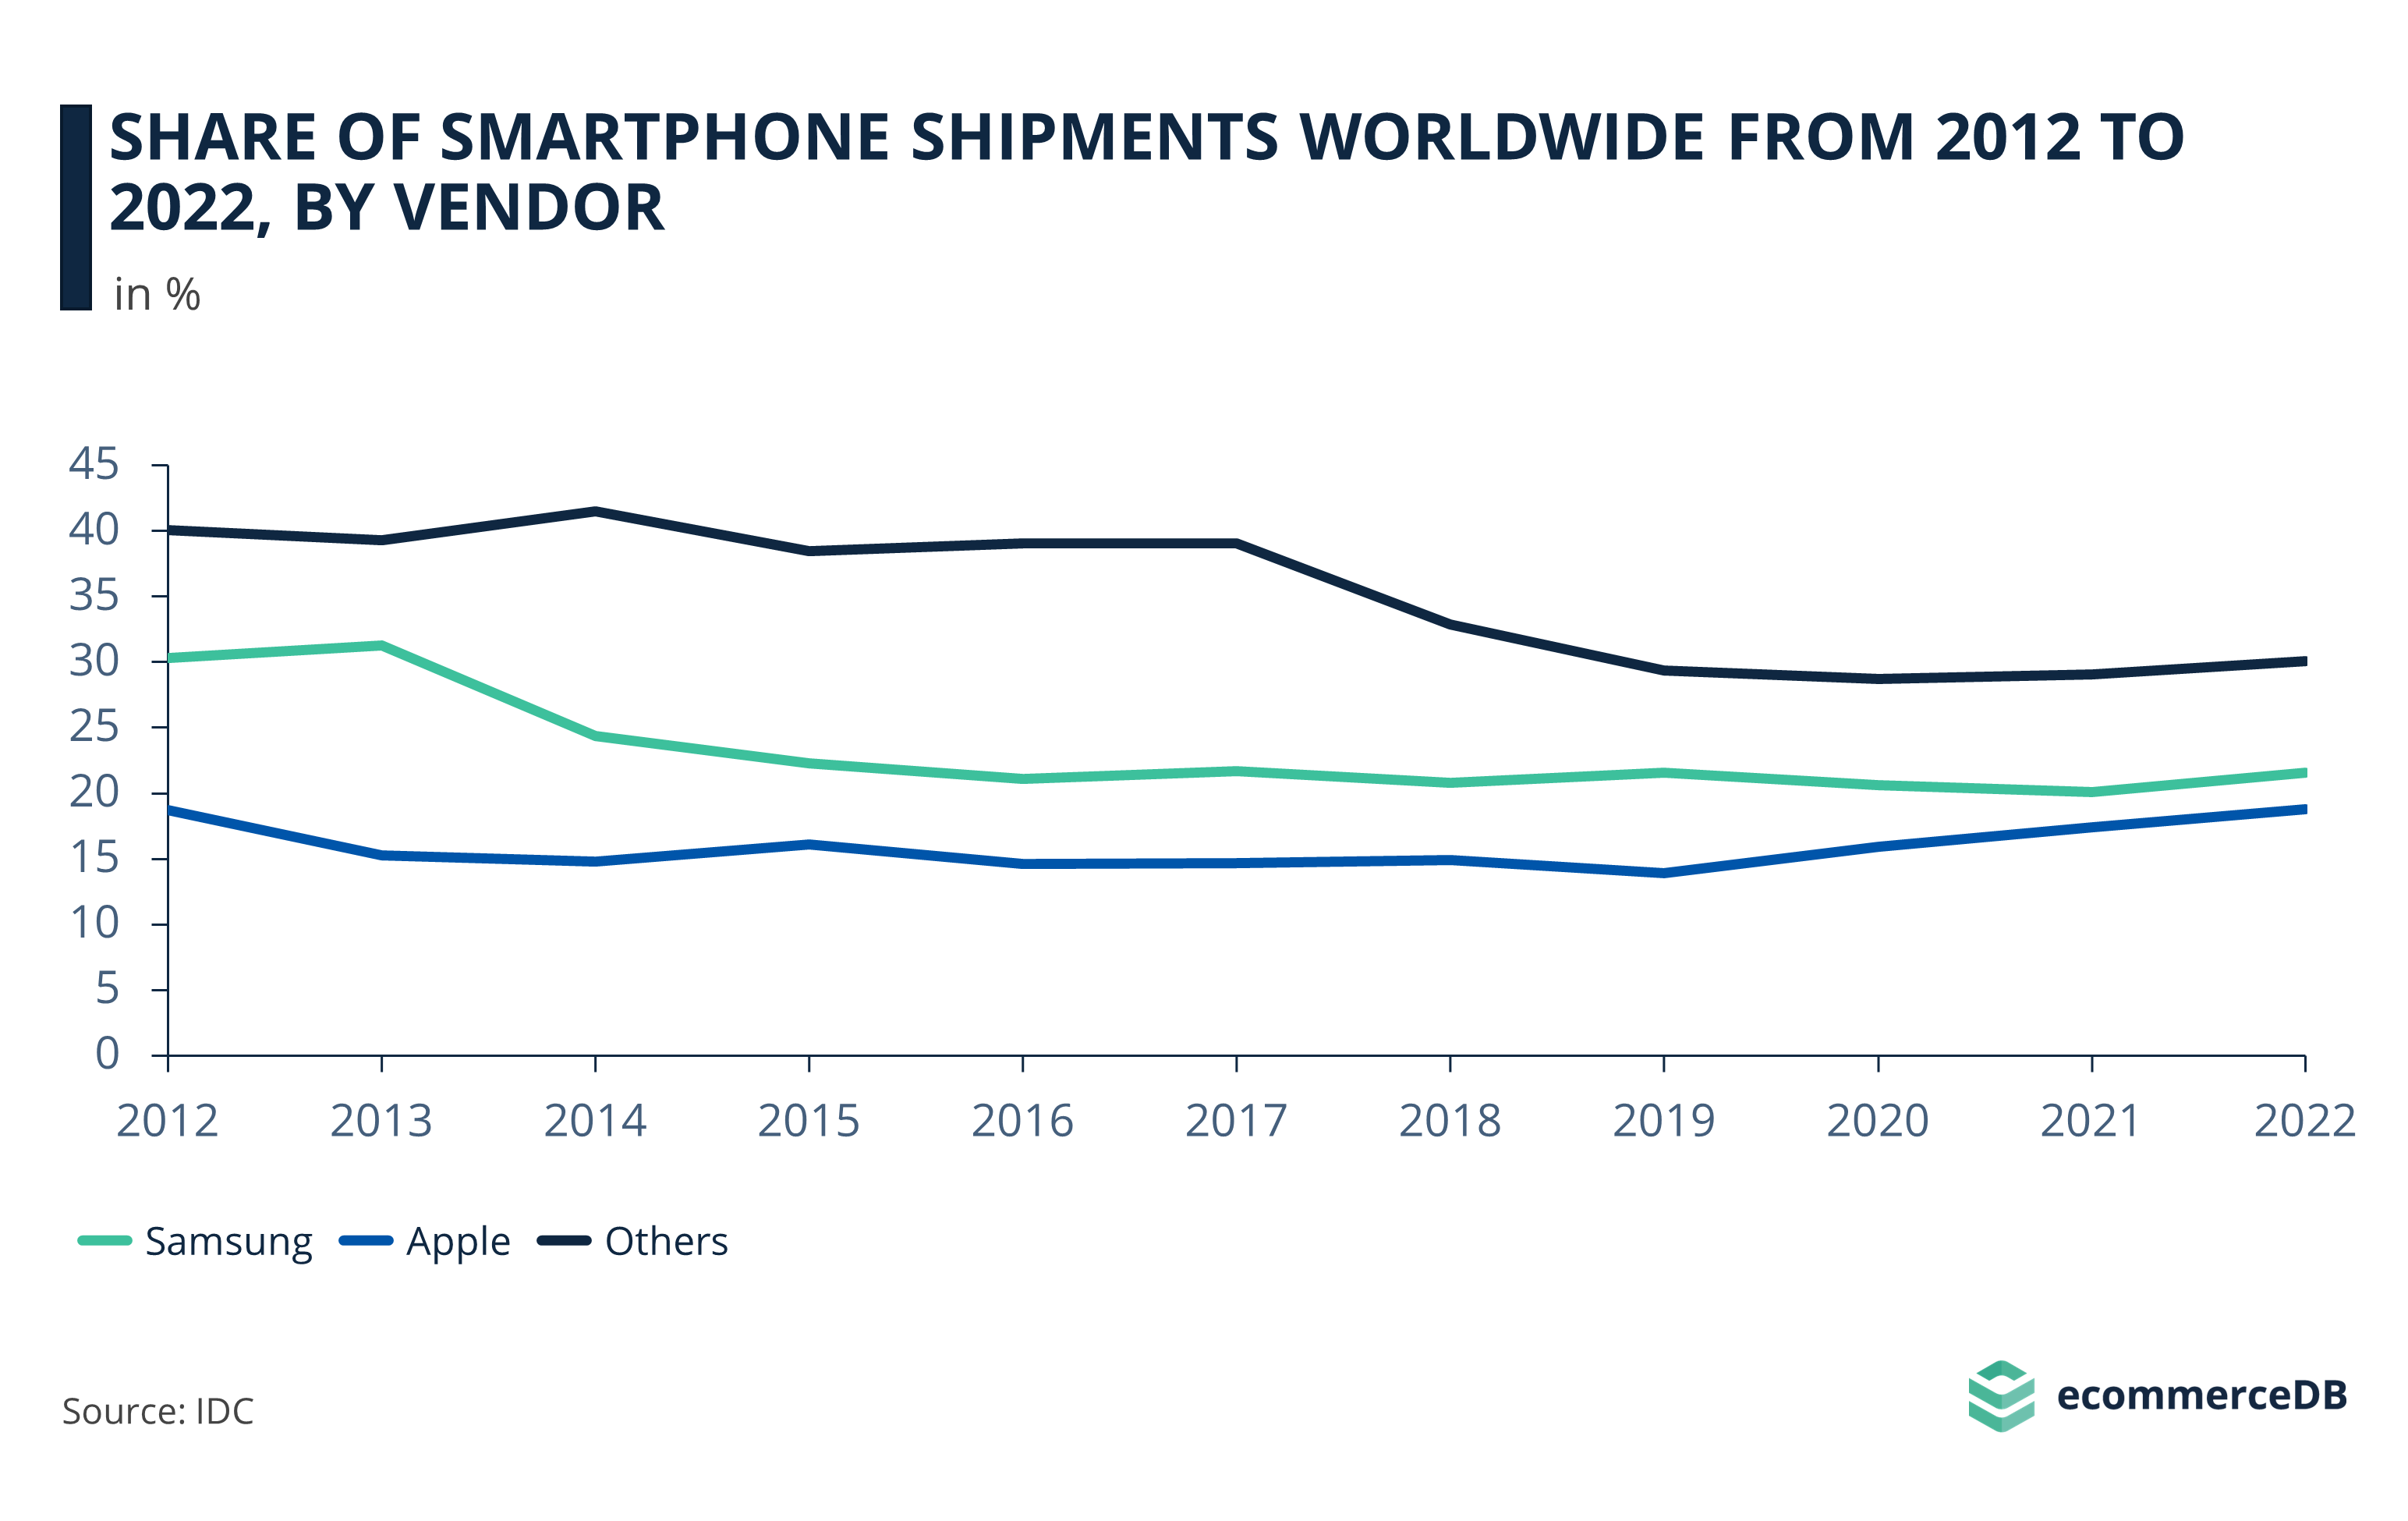 Share of Smartphone Shipments Worldwide from 2012 to 2022, by Vendor